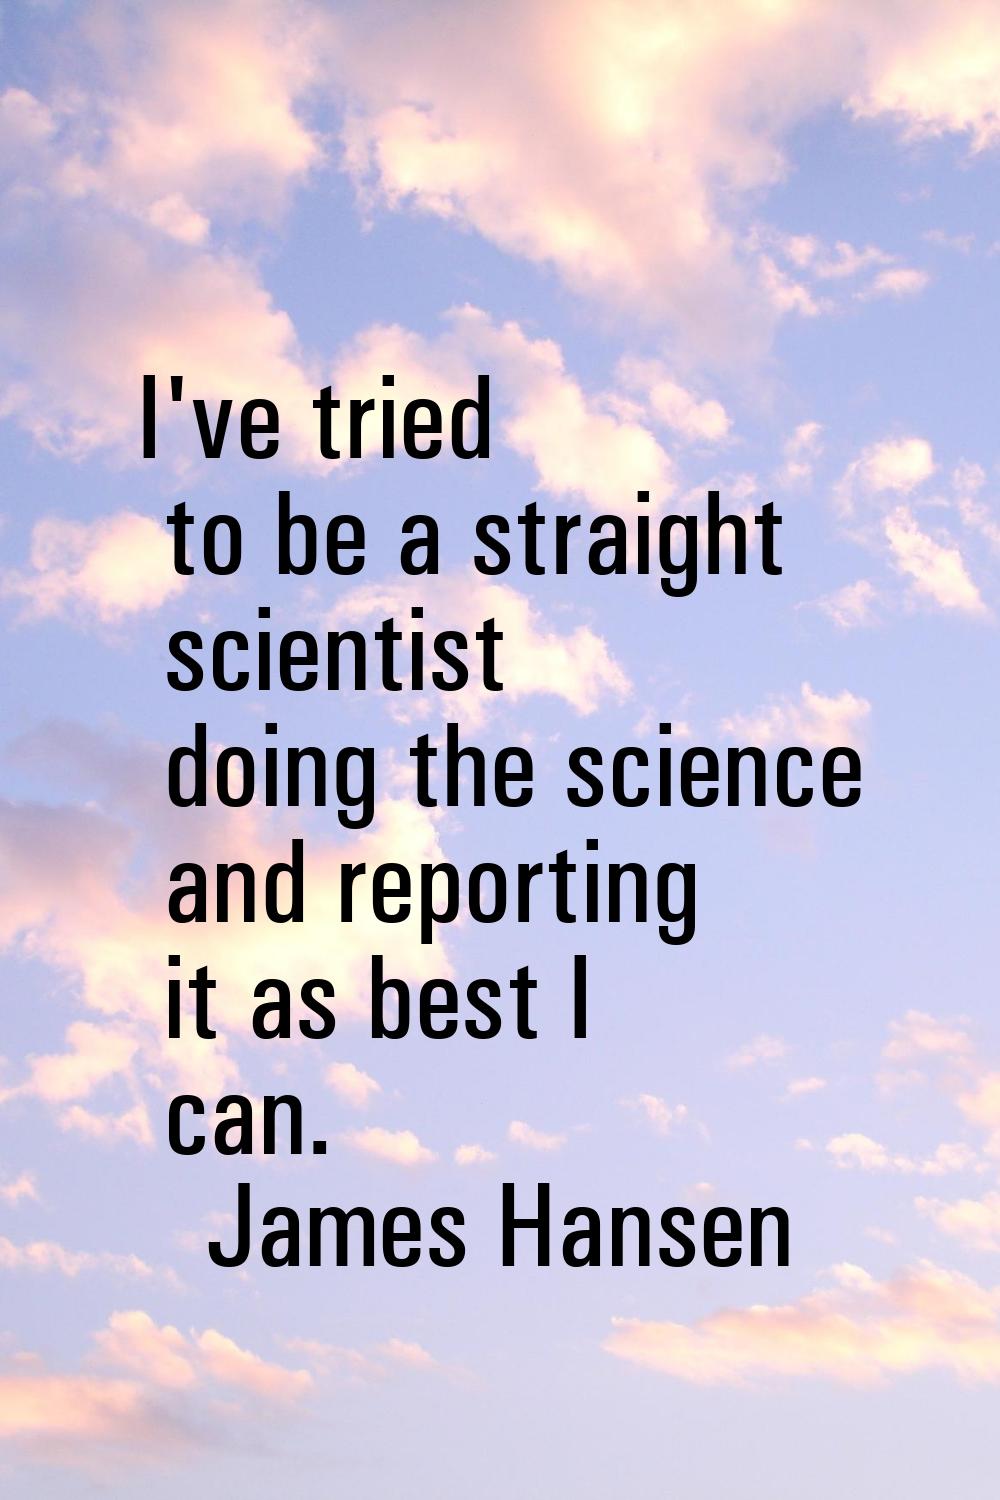 I've tried to be a straight scientist doing the science and reporting it as best I can.